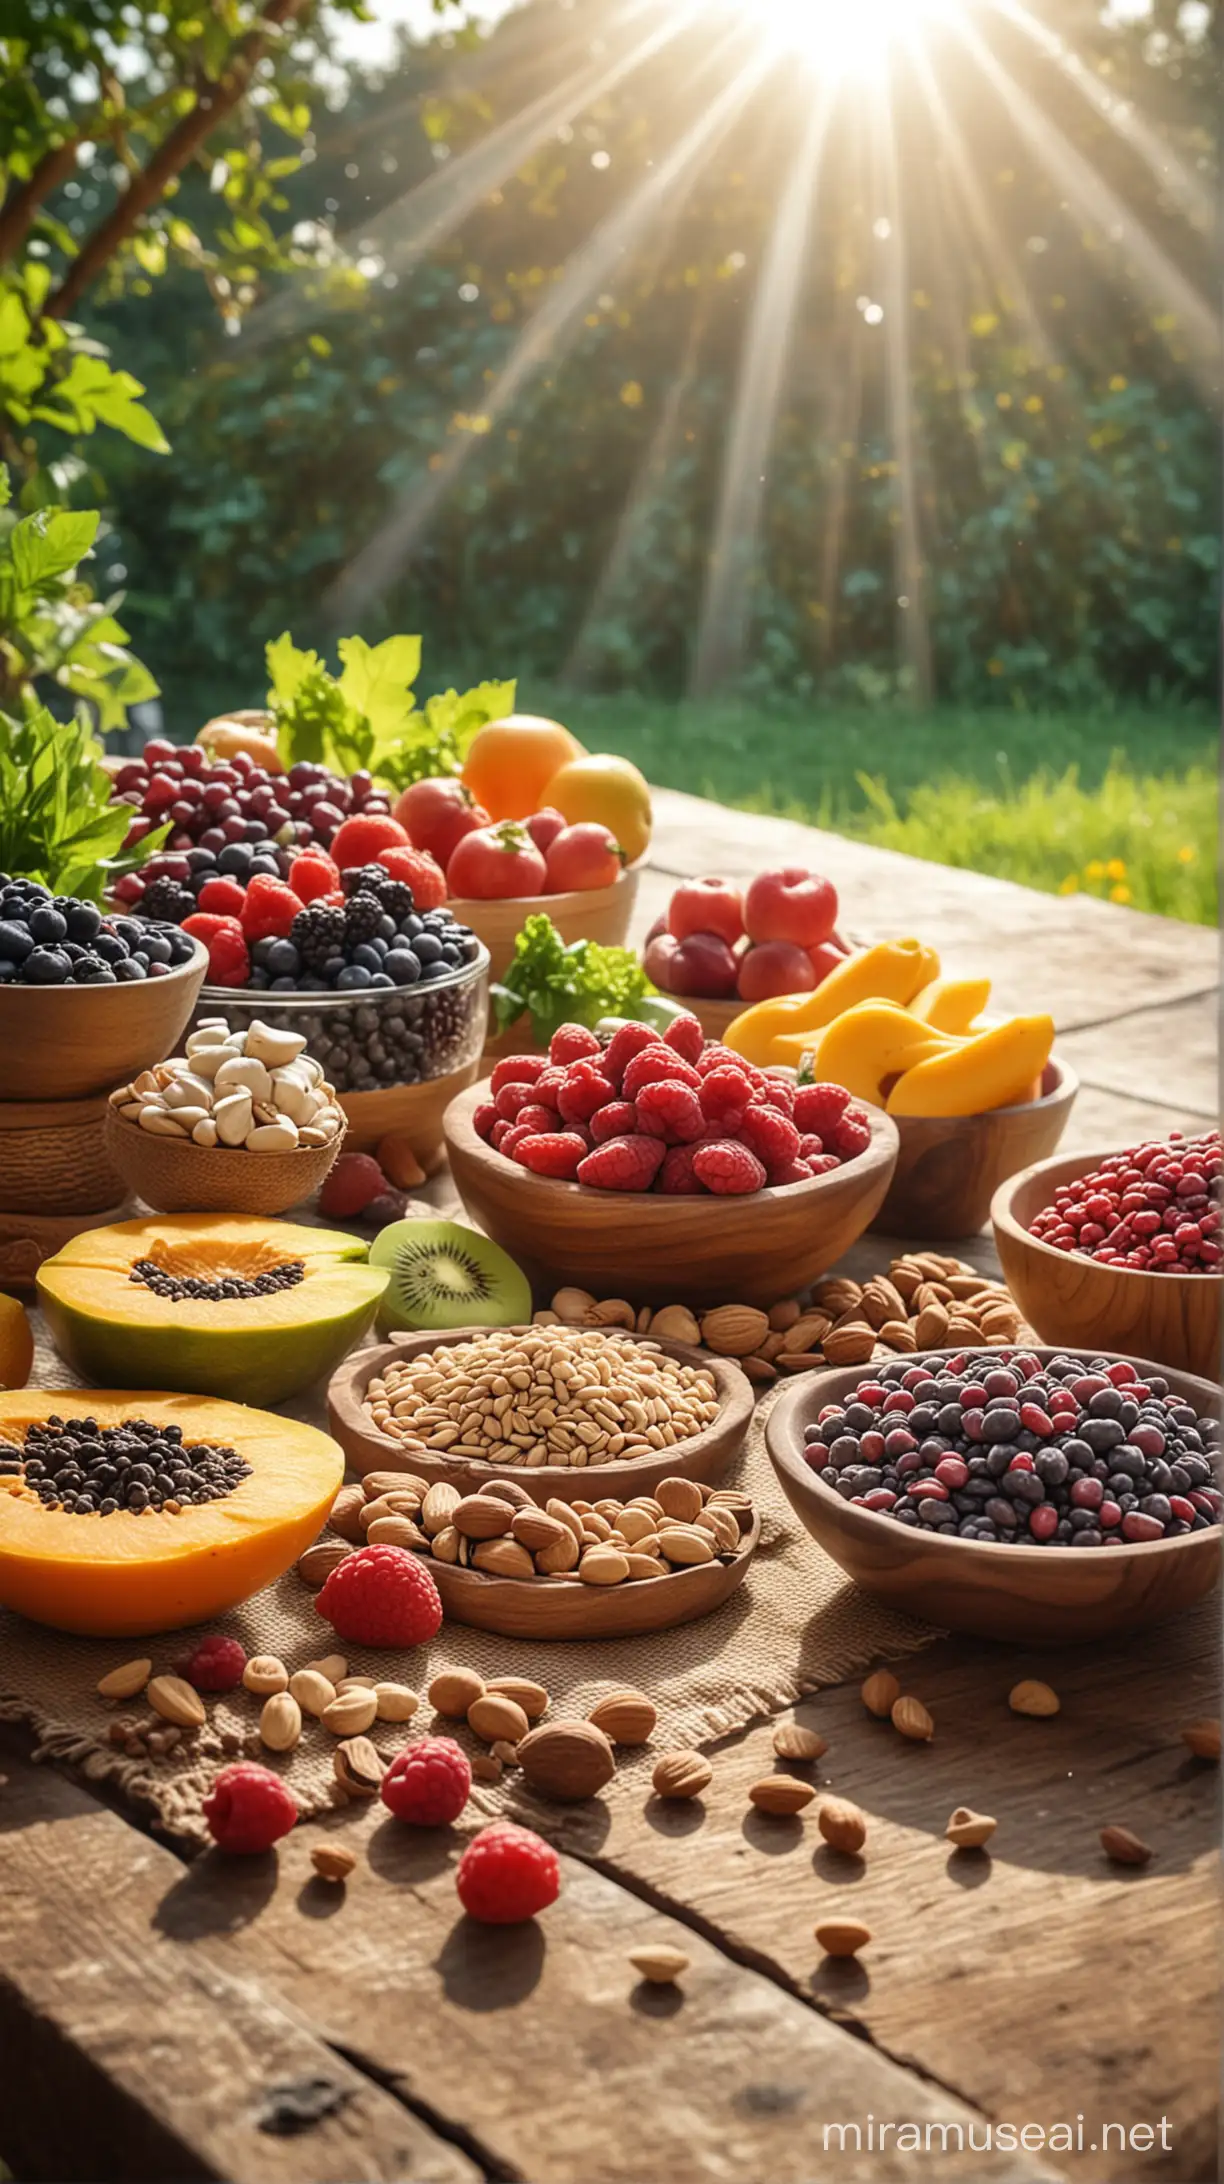 Assortment of Superfoods on Table with Sunlight Effect Healthy Breakfast Spread in Natural Morning Light